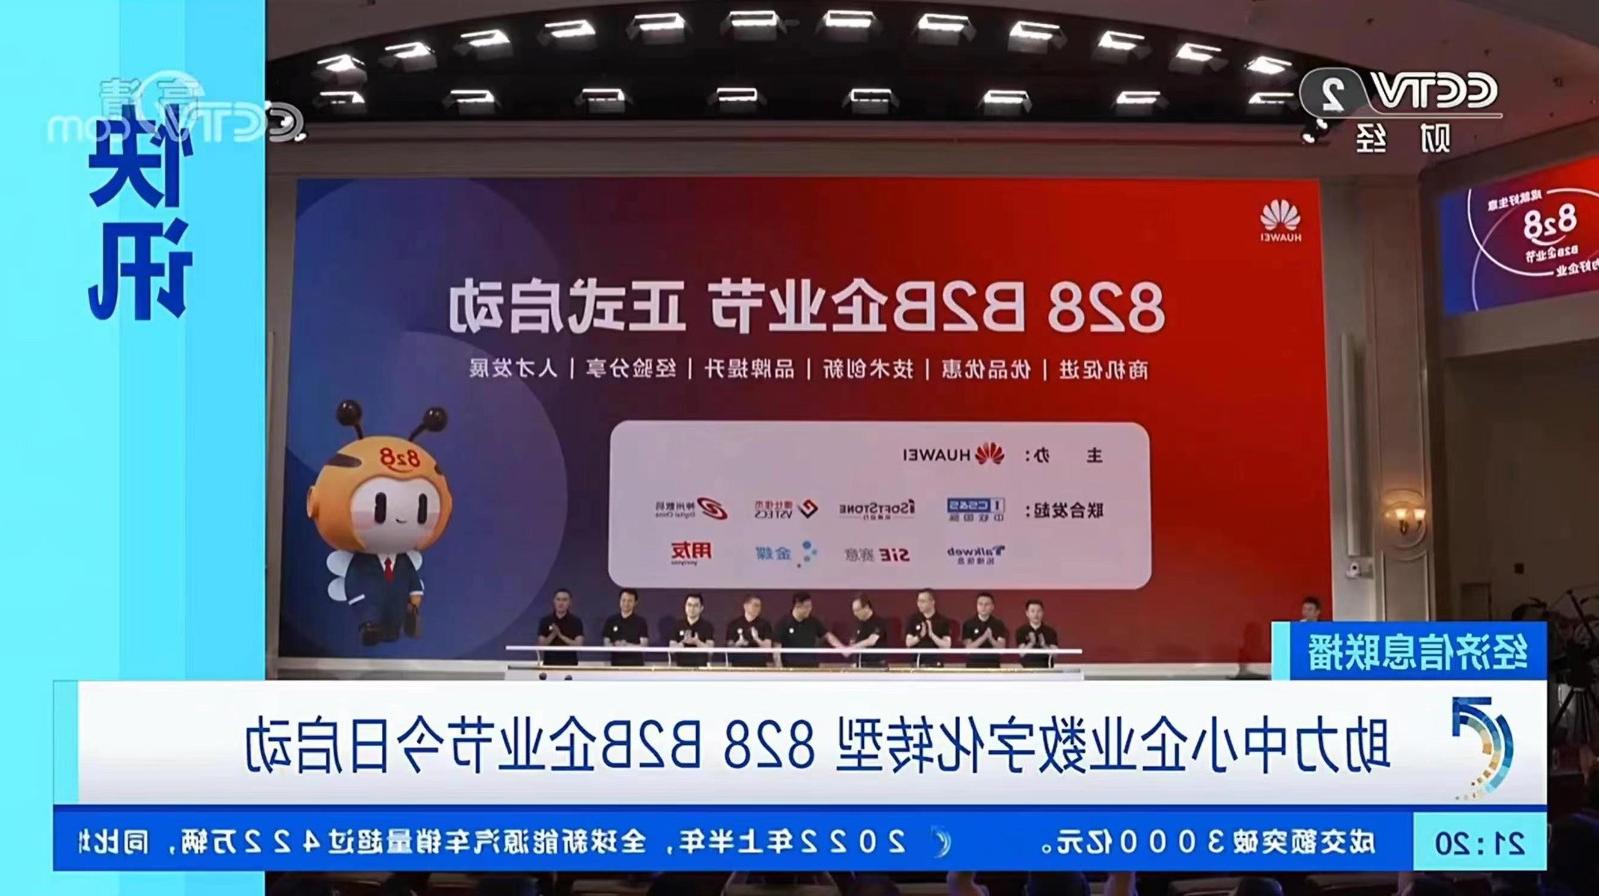 SIE Information jointly launched the 828 B2B Enterprise Festival to assist small and medium-sized ma